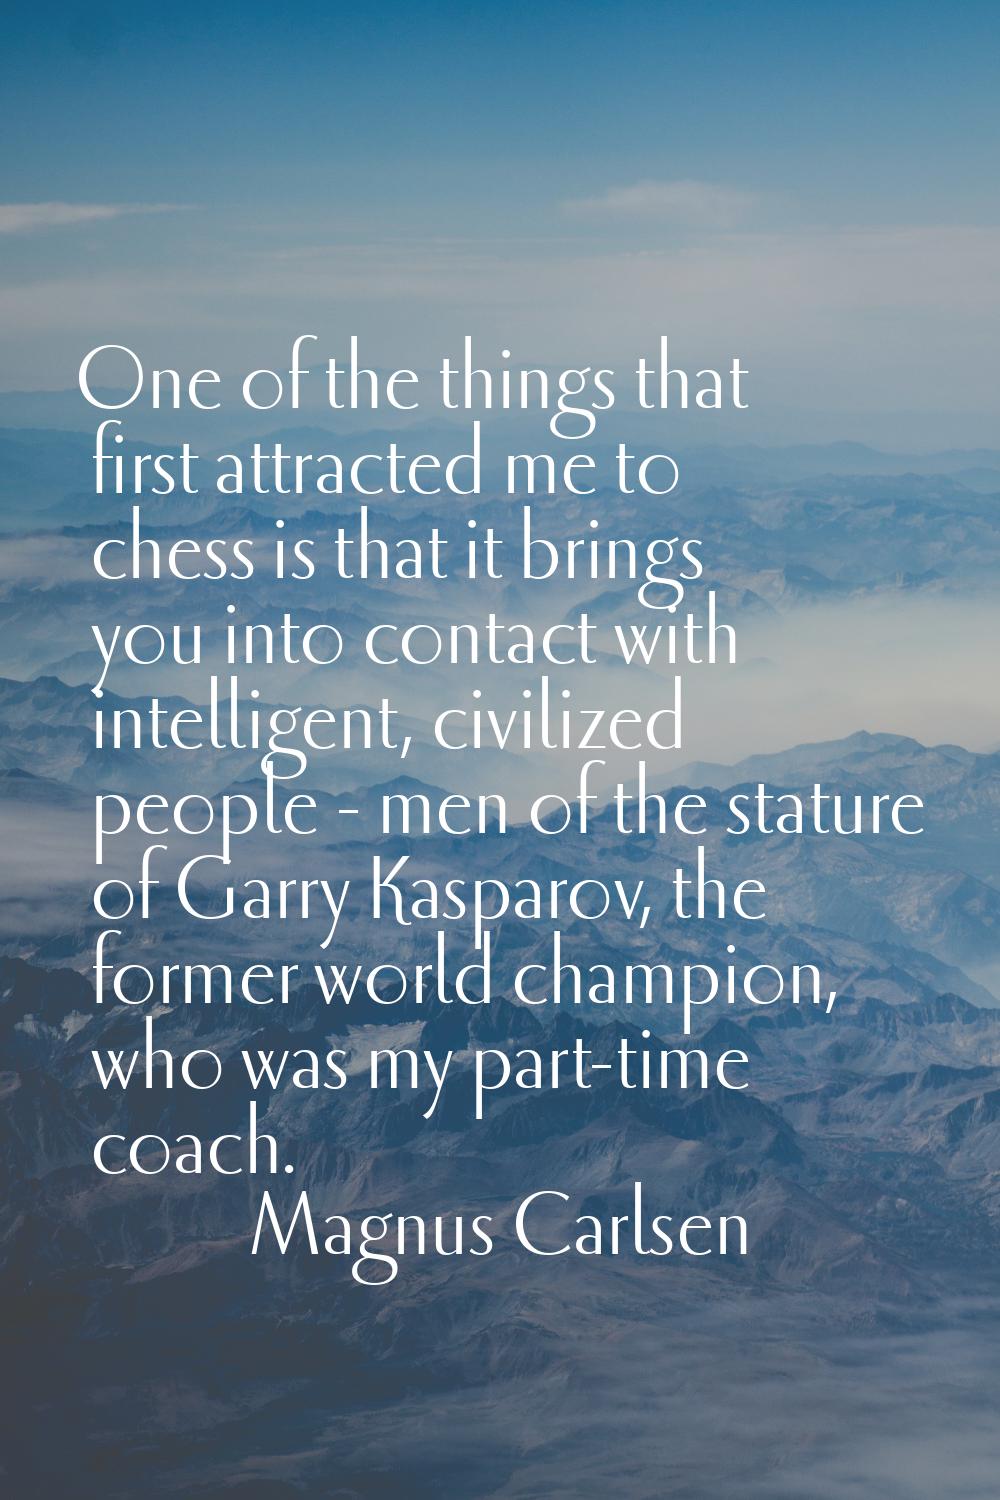 One of the things that first attracted me to chess is that it brings you into contact with intellig